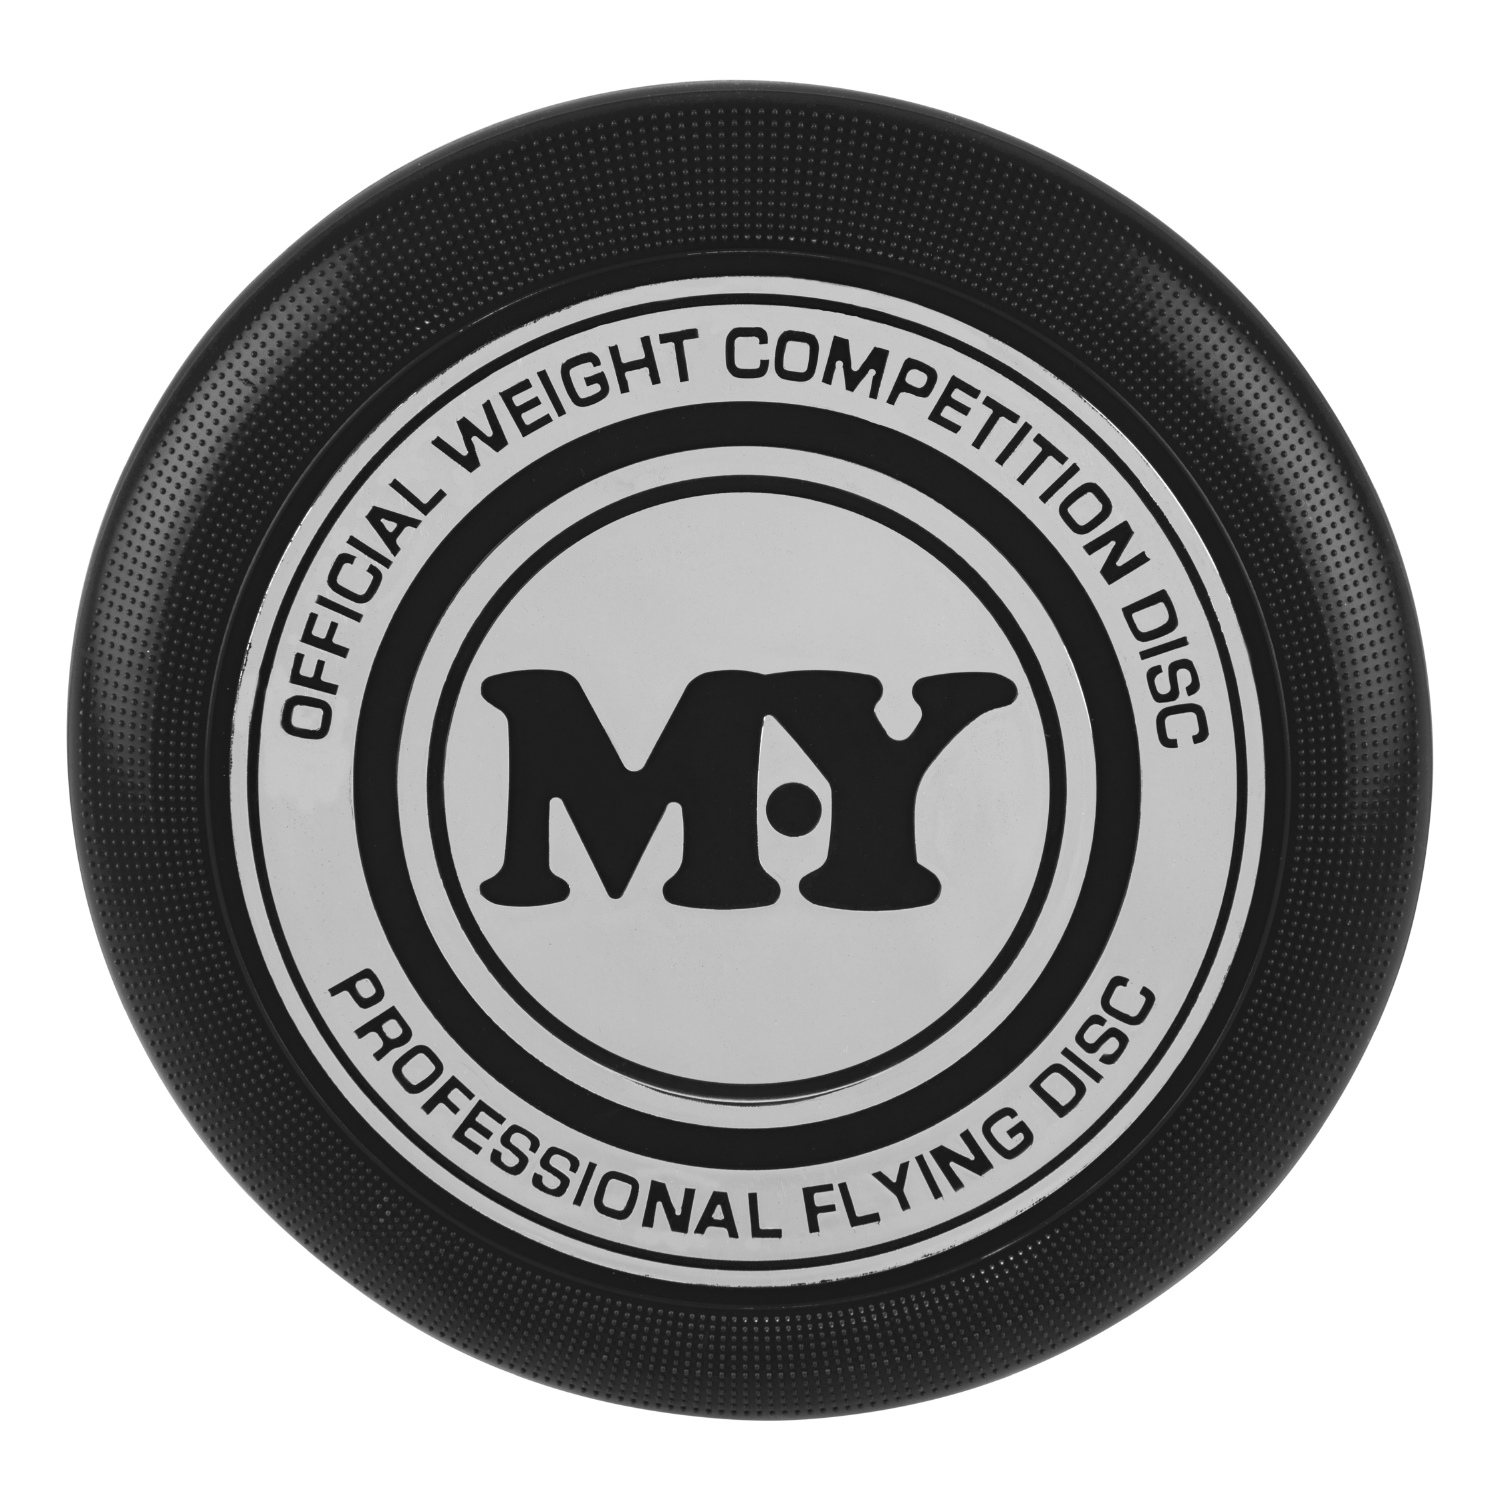 180g Professional Flying Disc Image 4